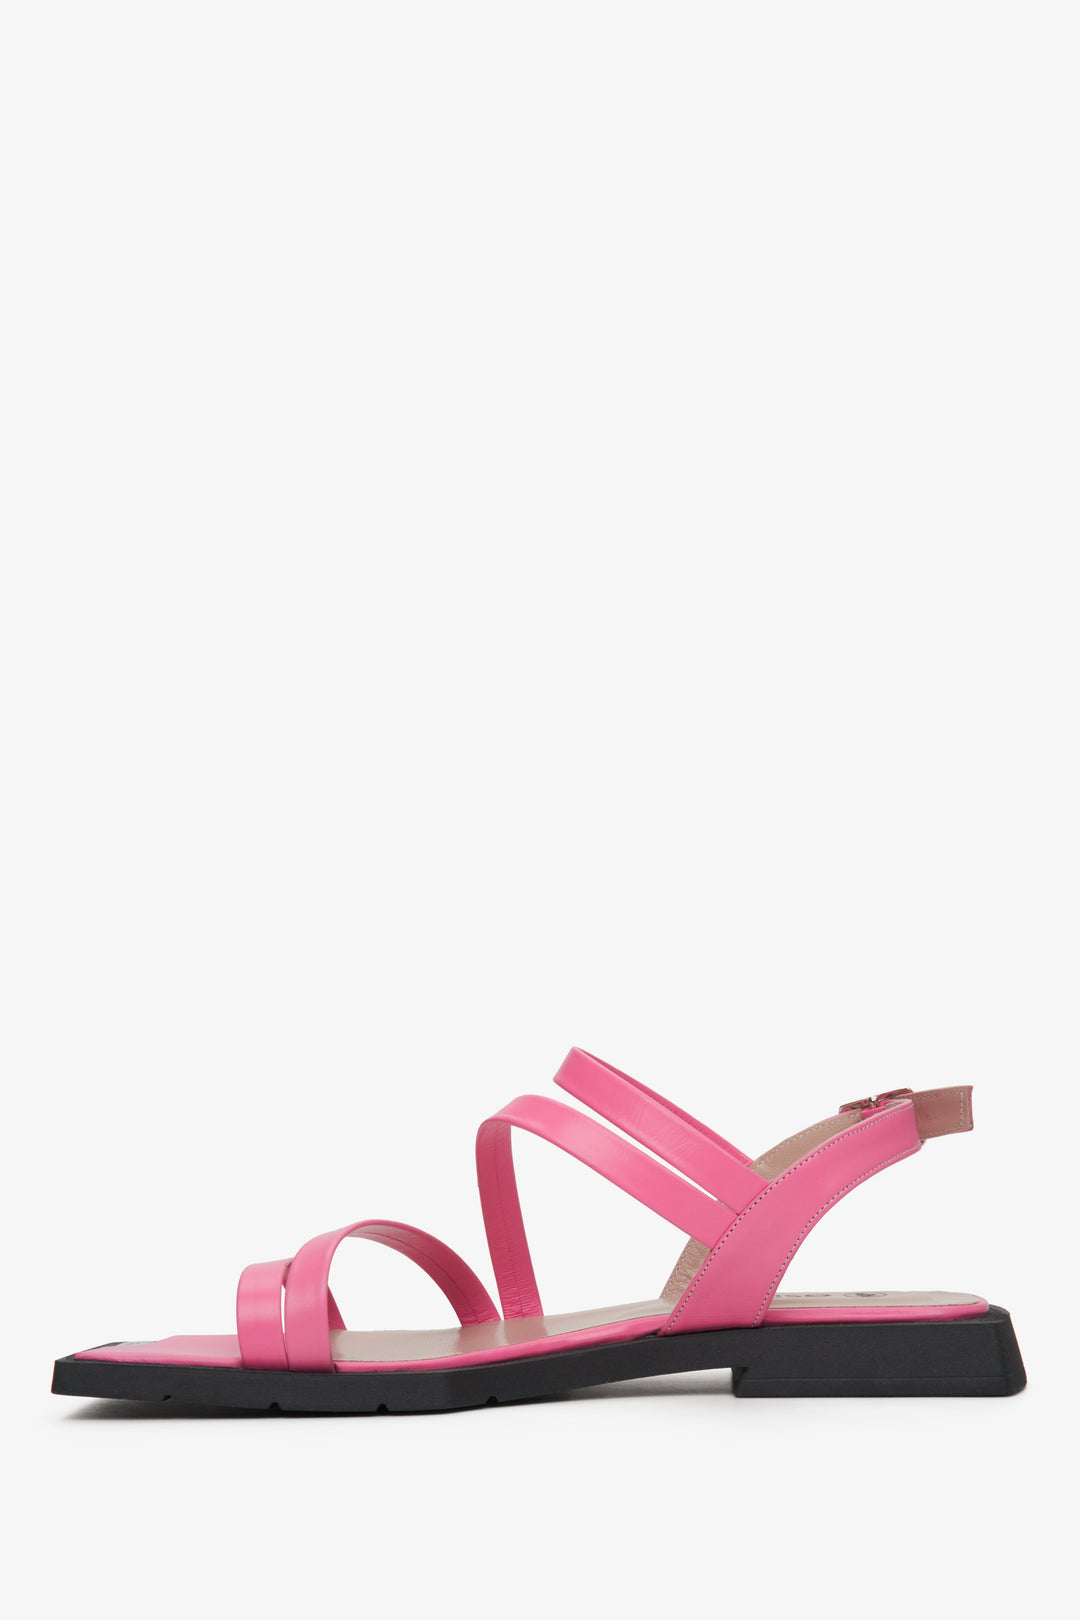 Women's summer sandals with thin straps: Estro brand, color pink.